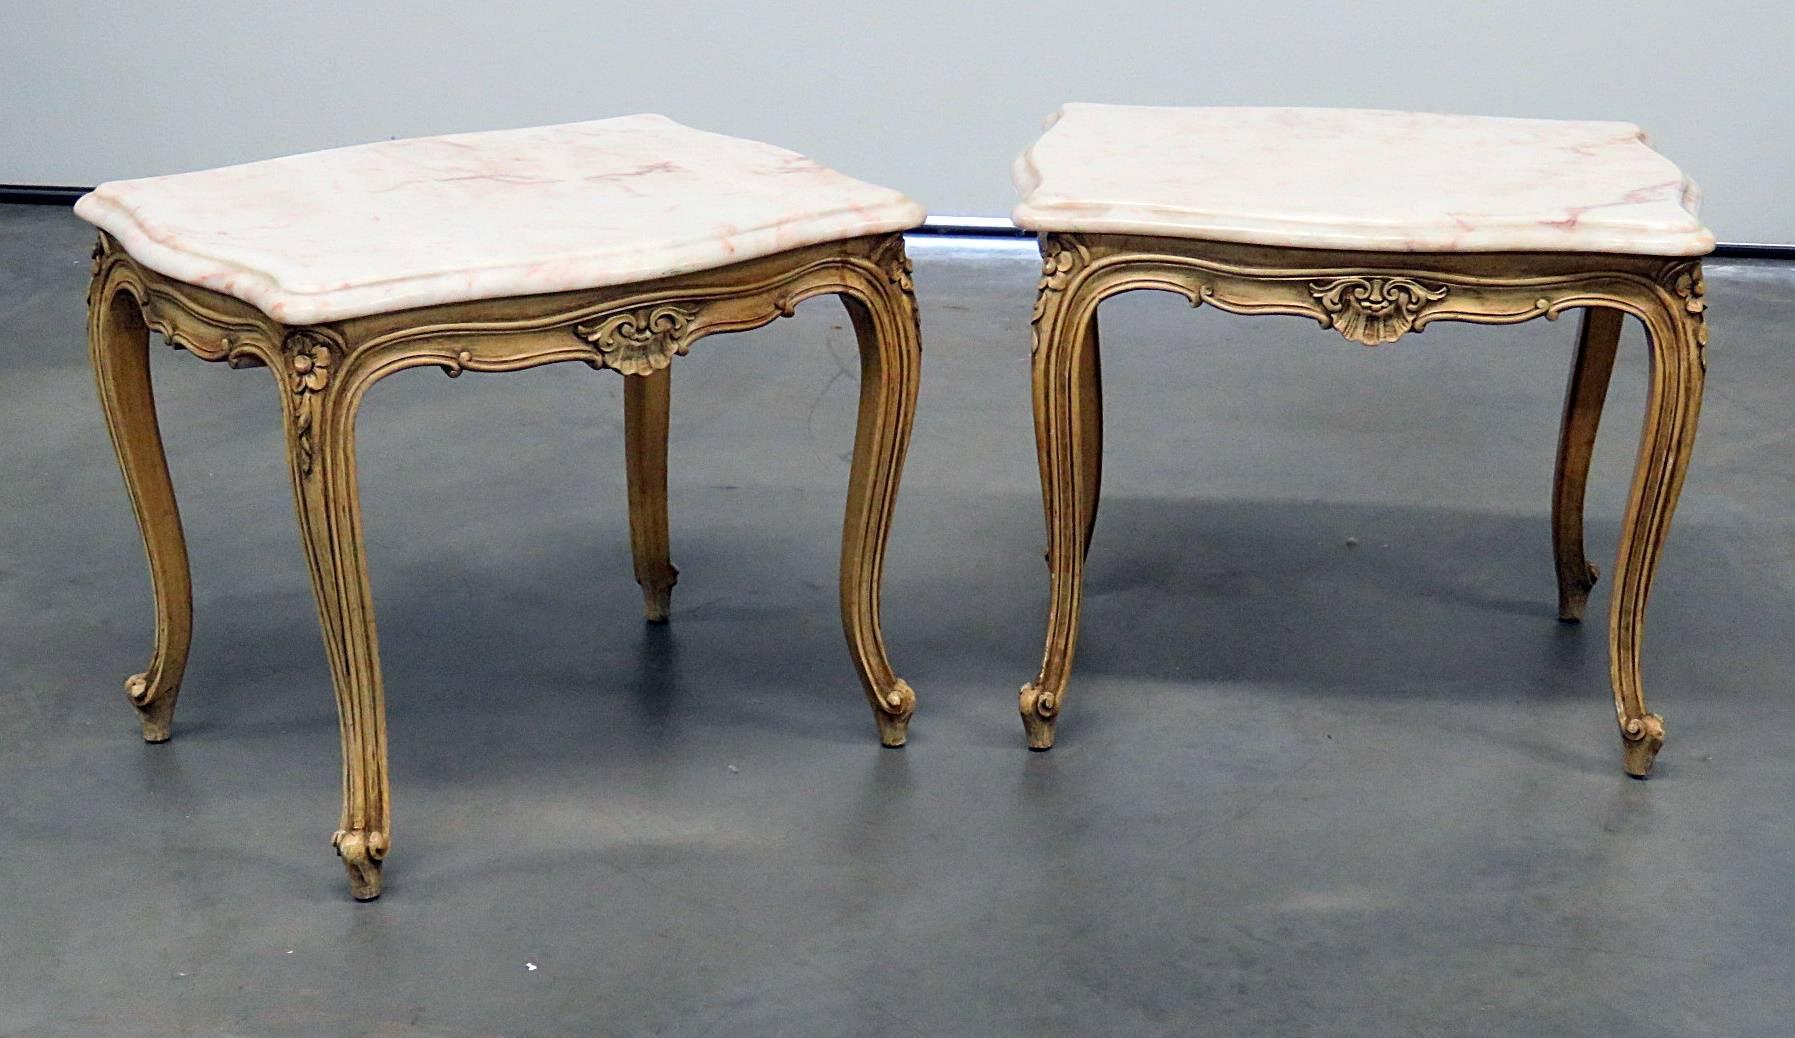 Pair of French Provincial style paint decorated marble-top end tables.